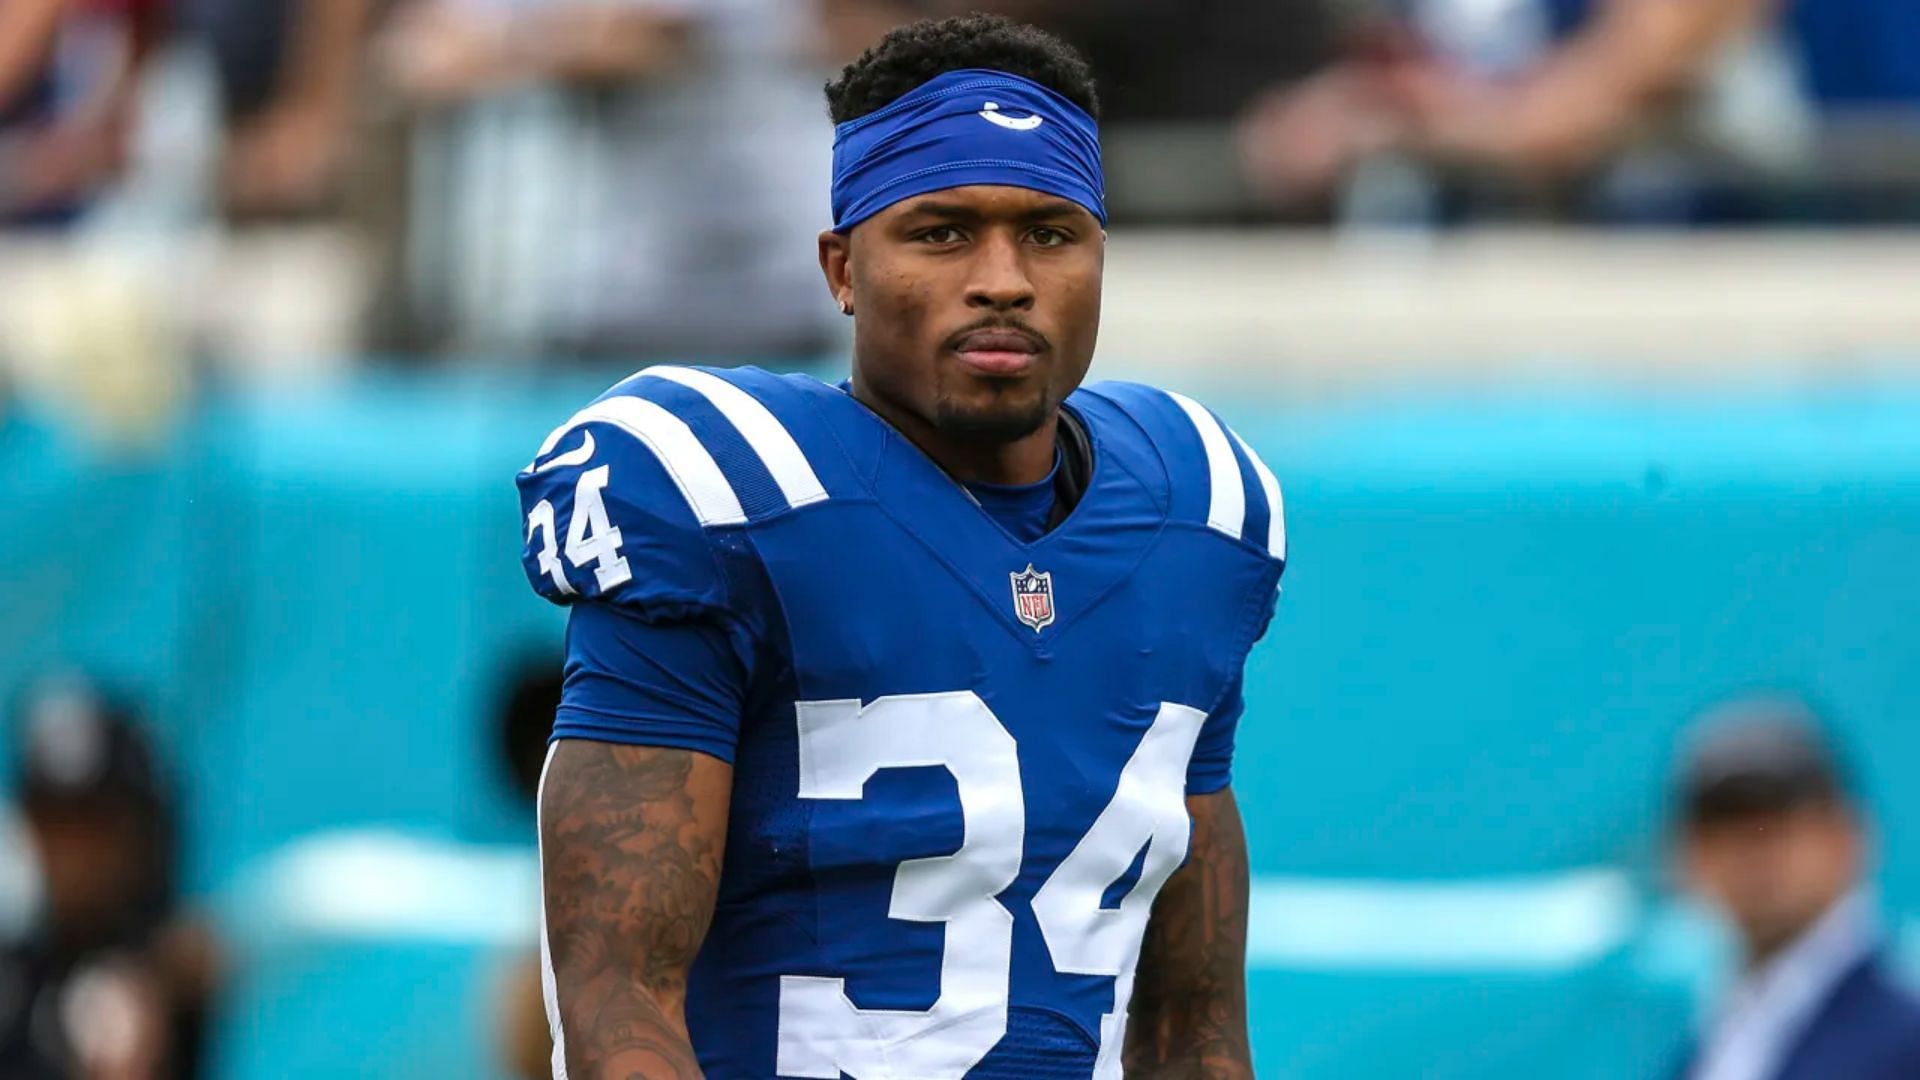 Former Indianapolis Colts cornerback Isaiah Rodgers is suspended due to gambling violations. (Image credit: Gary McCullough/The Associated Press)